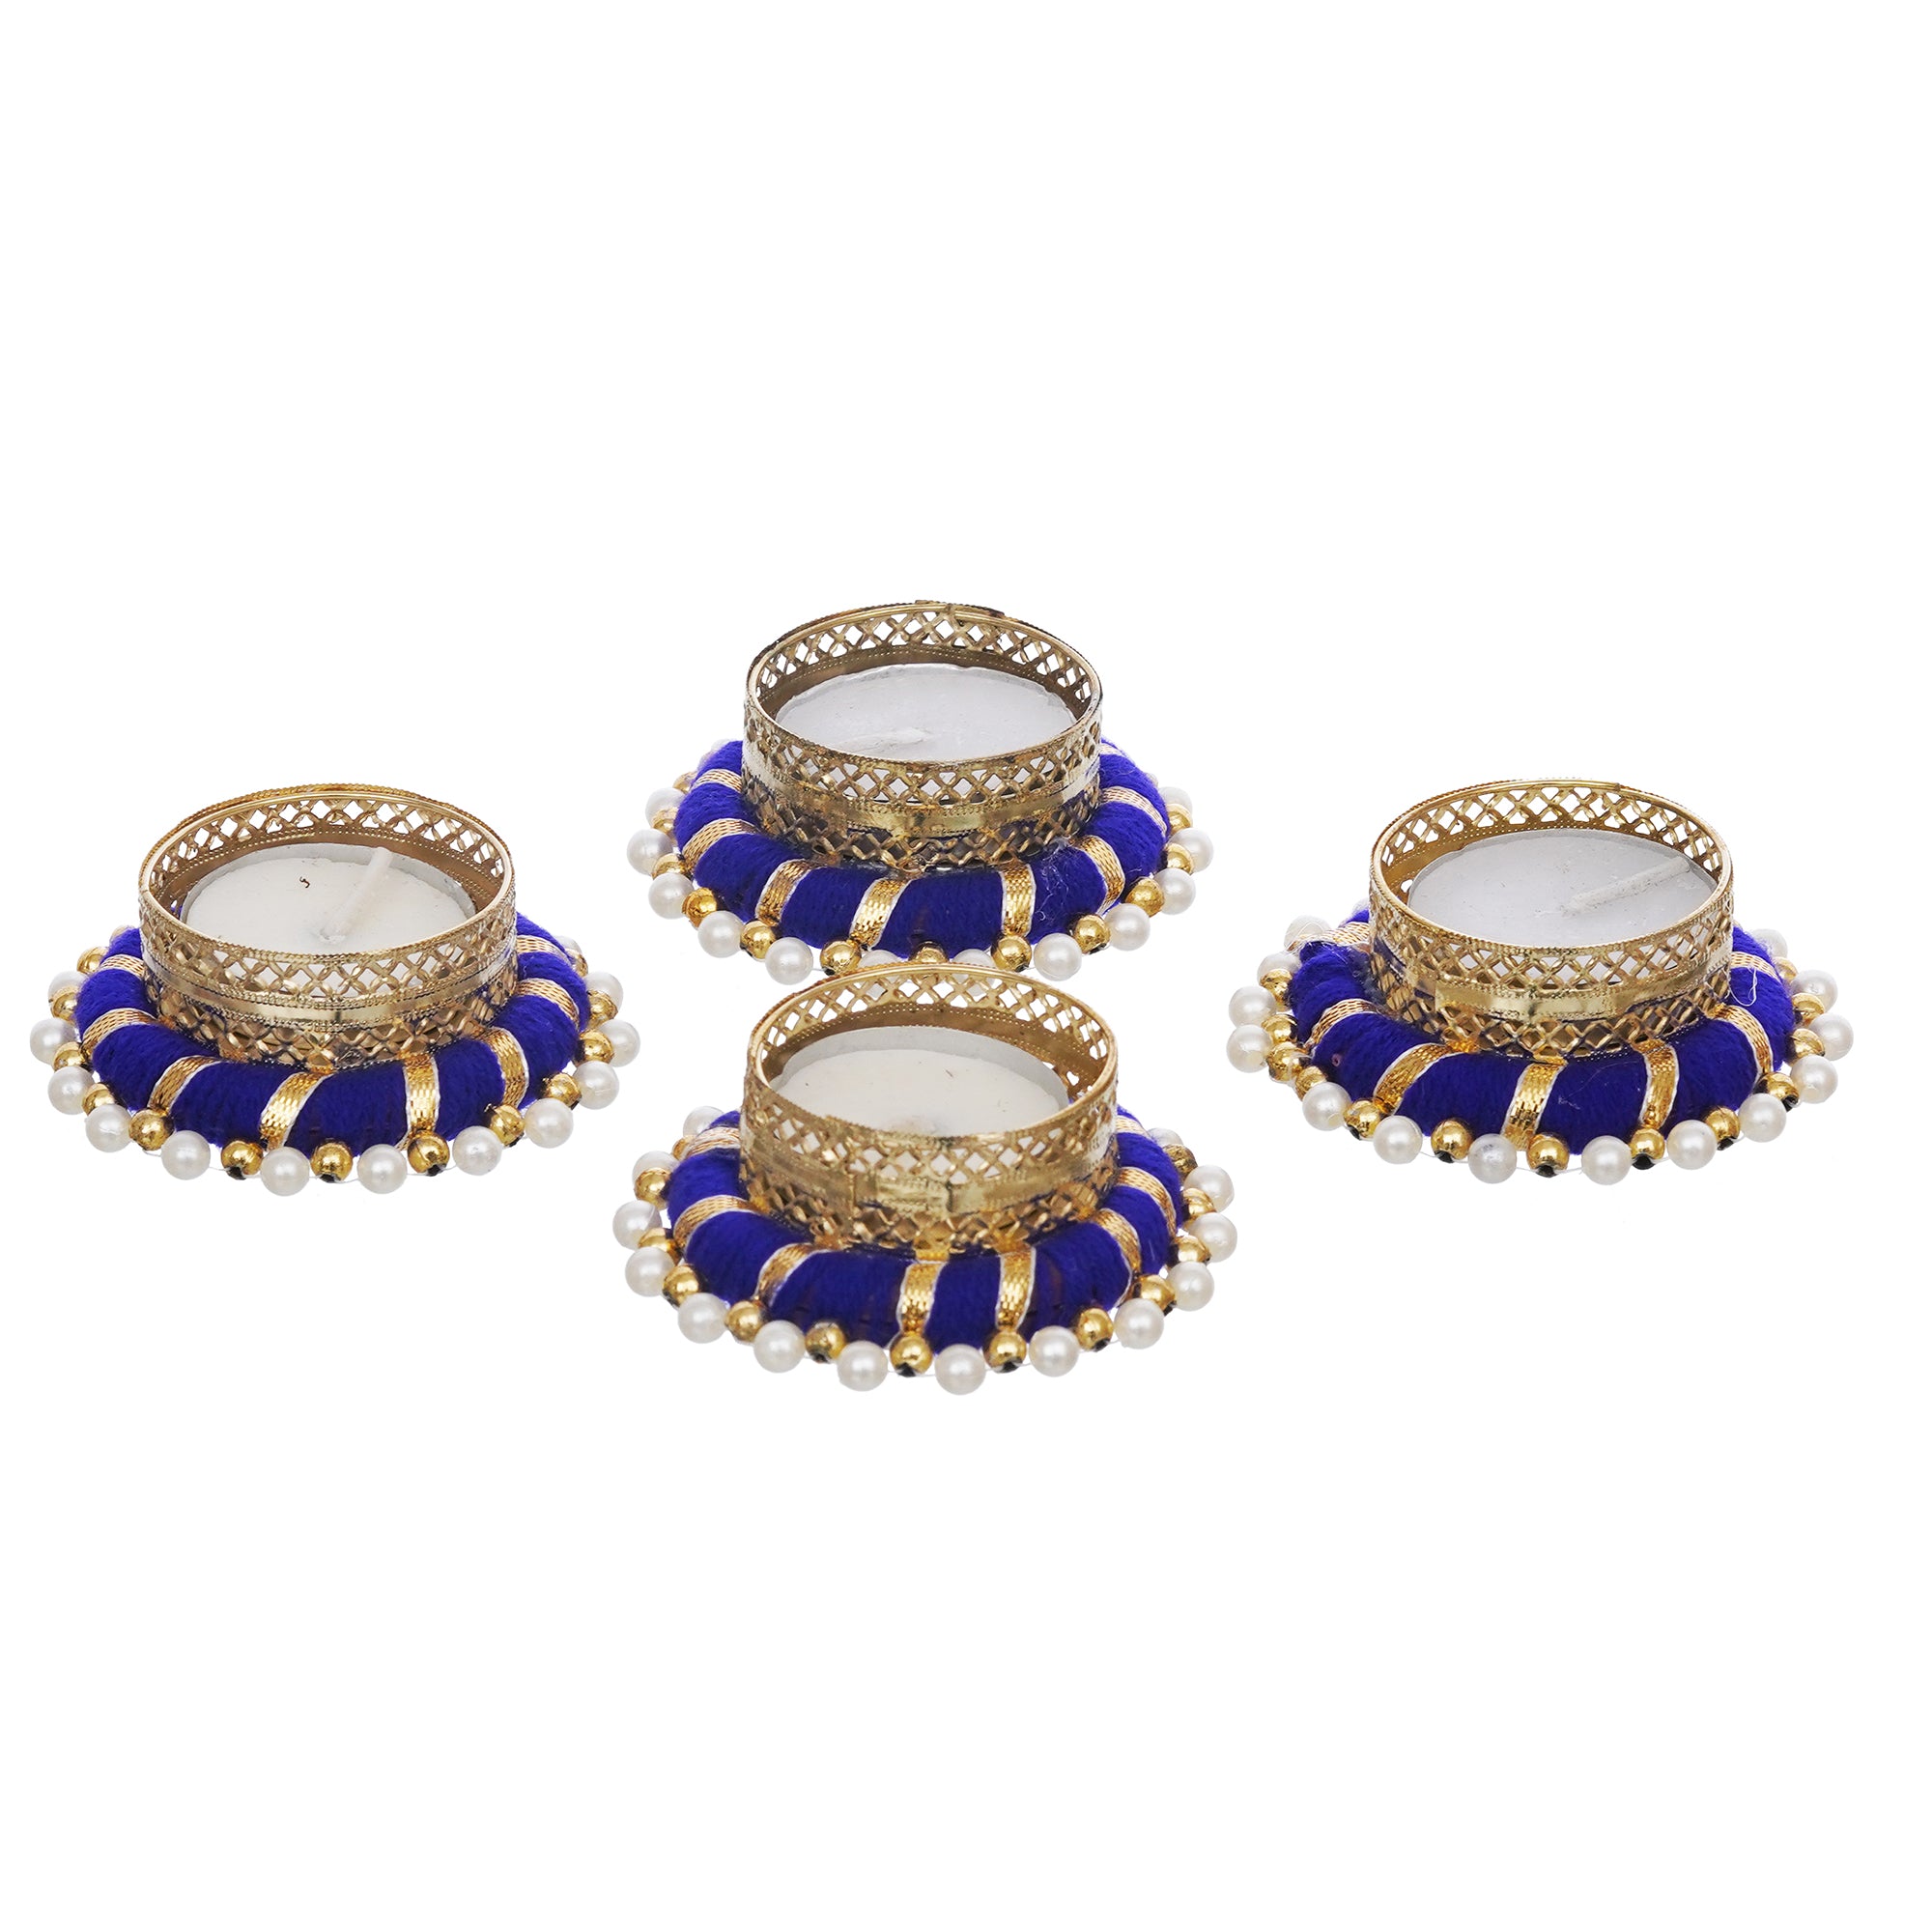 eCraftIndia Set of 4 Golden and Blue Round Shaped Beaded Decorative Tea Light Candle Holders 2